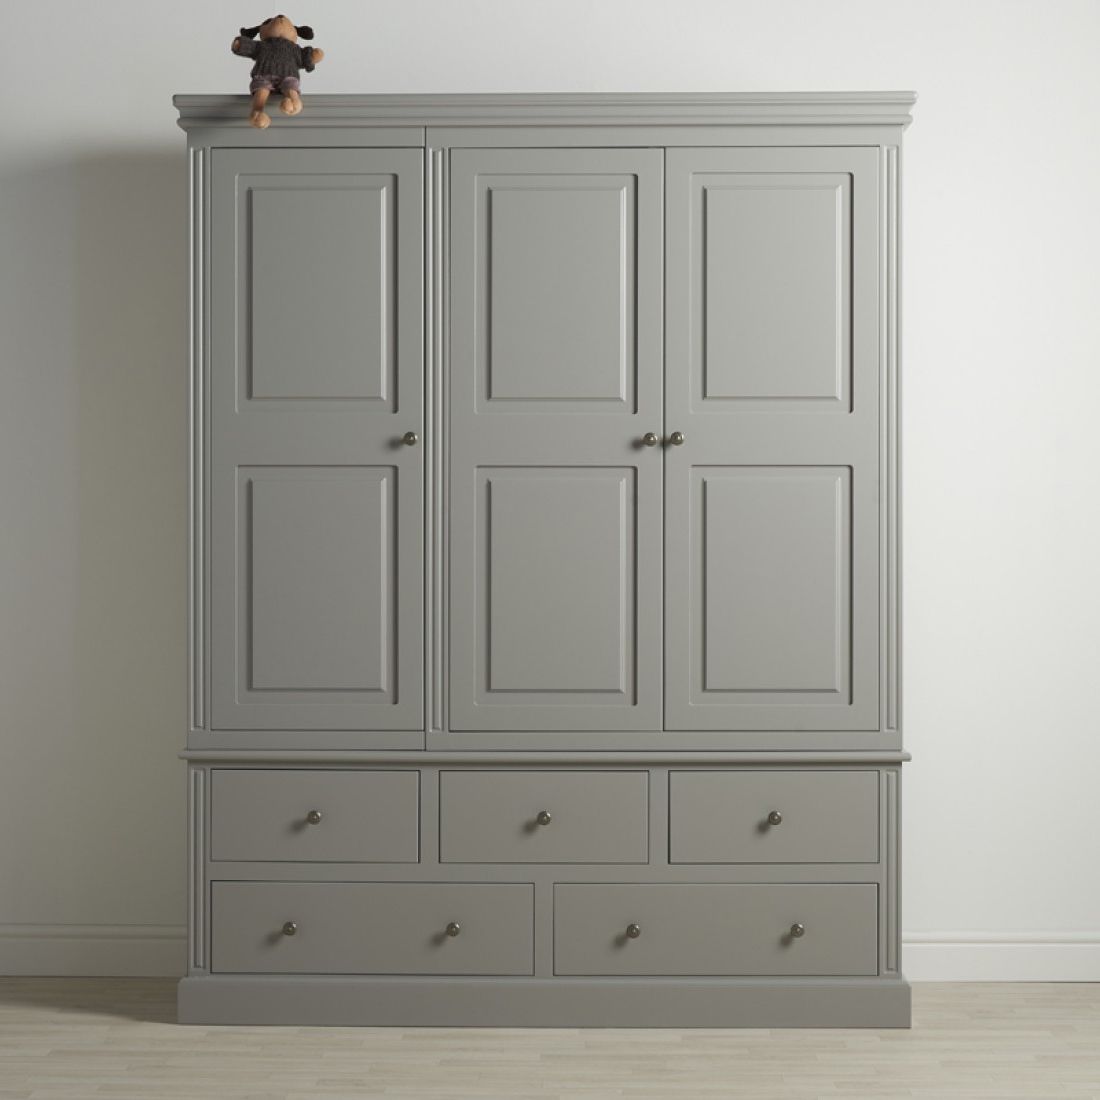 Dovecot 3 Door 5 Drawer Wardrobe|wardrobes|bedrooms| Furniture Inside Wardrobes With 3 Drawers (Gallery 14 of 20)